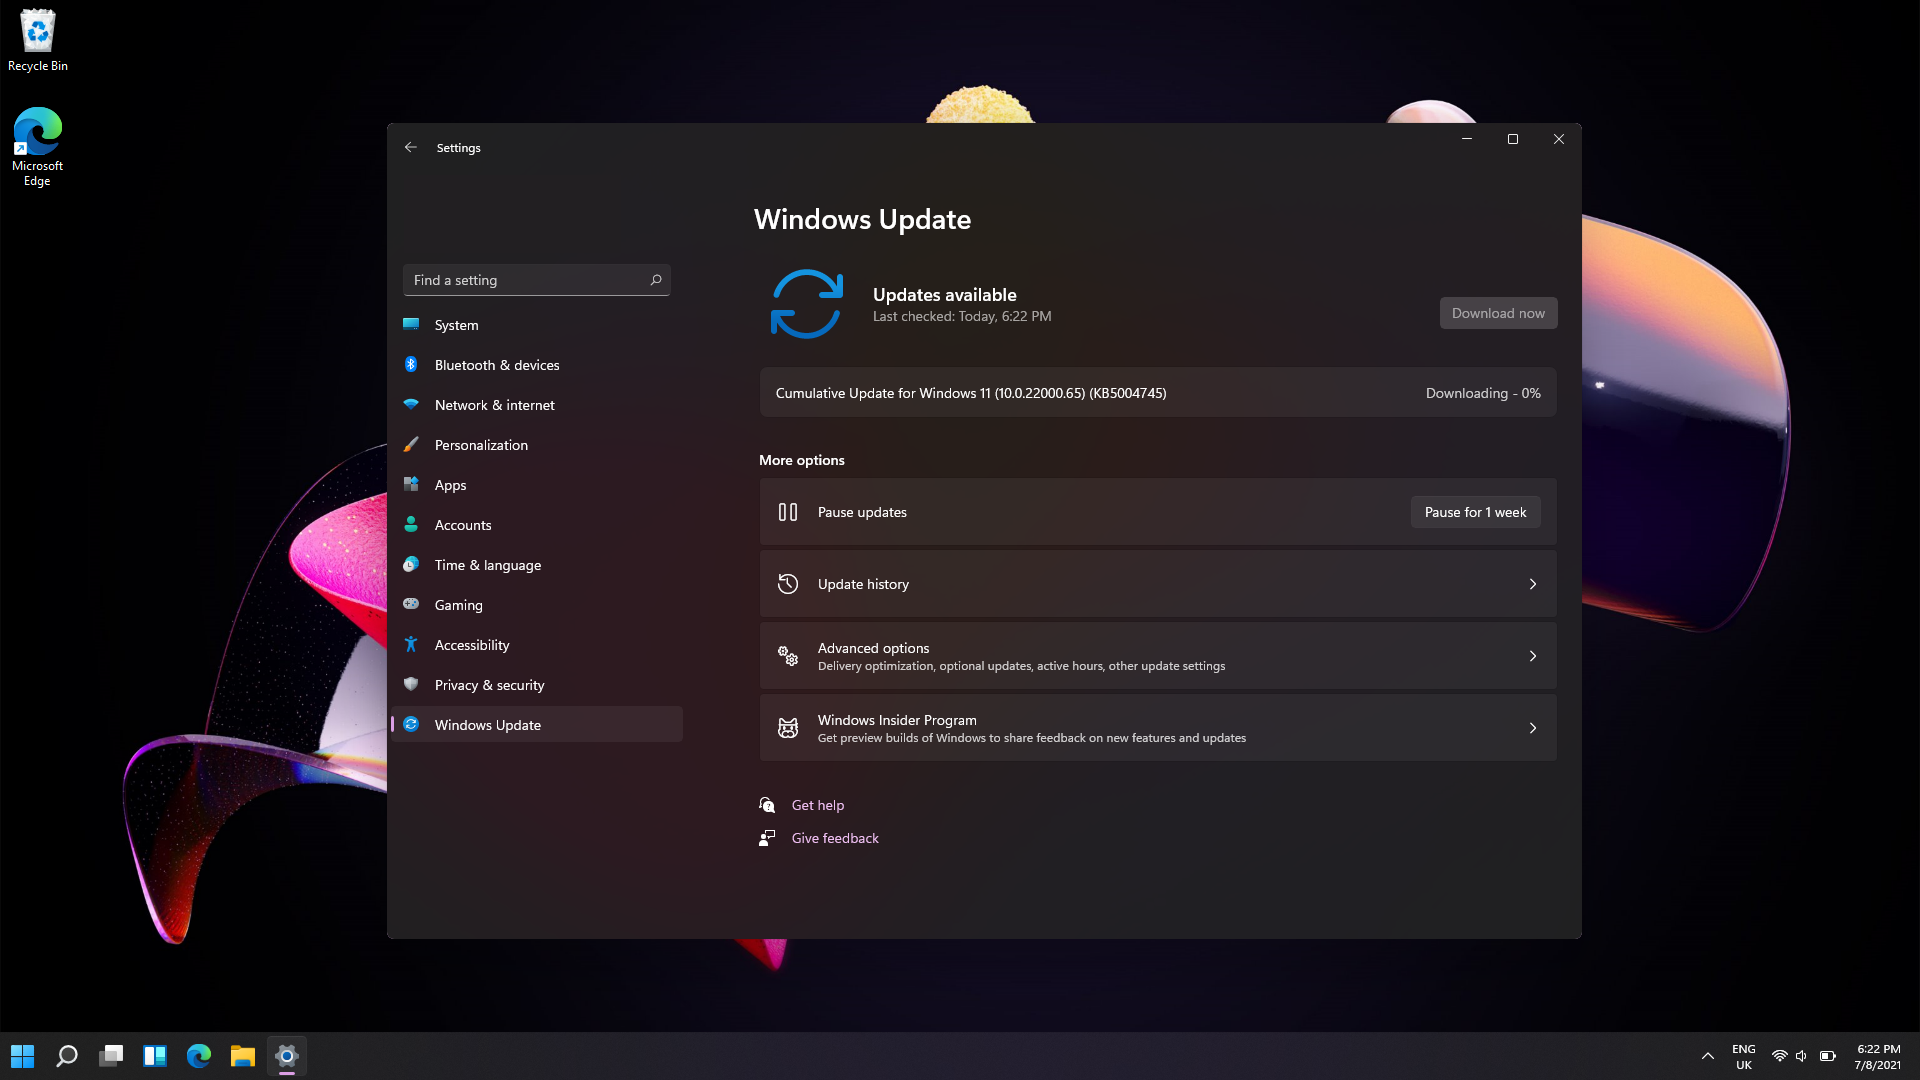 Windows 11 update showing as available